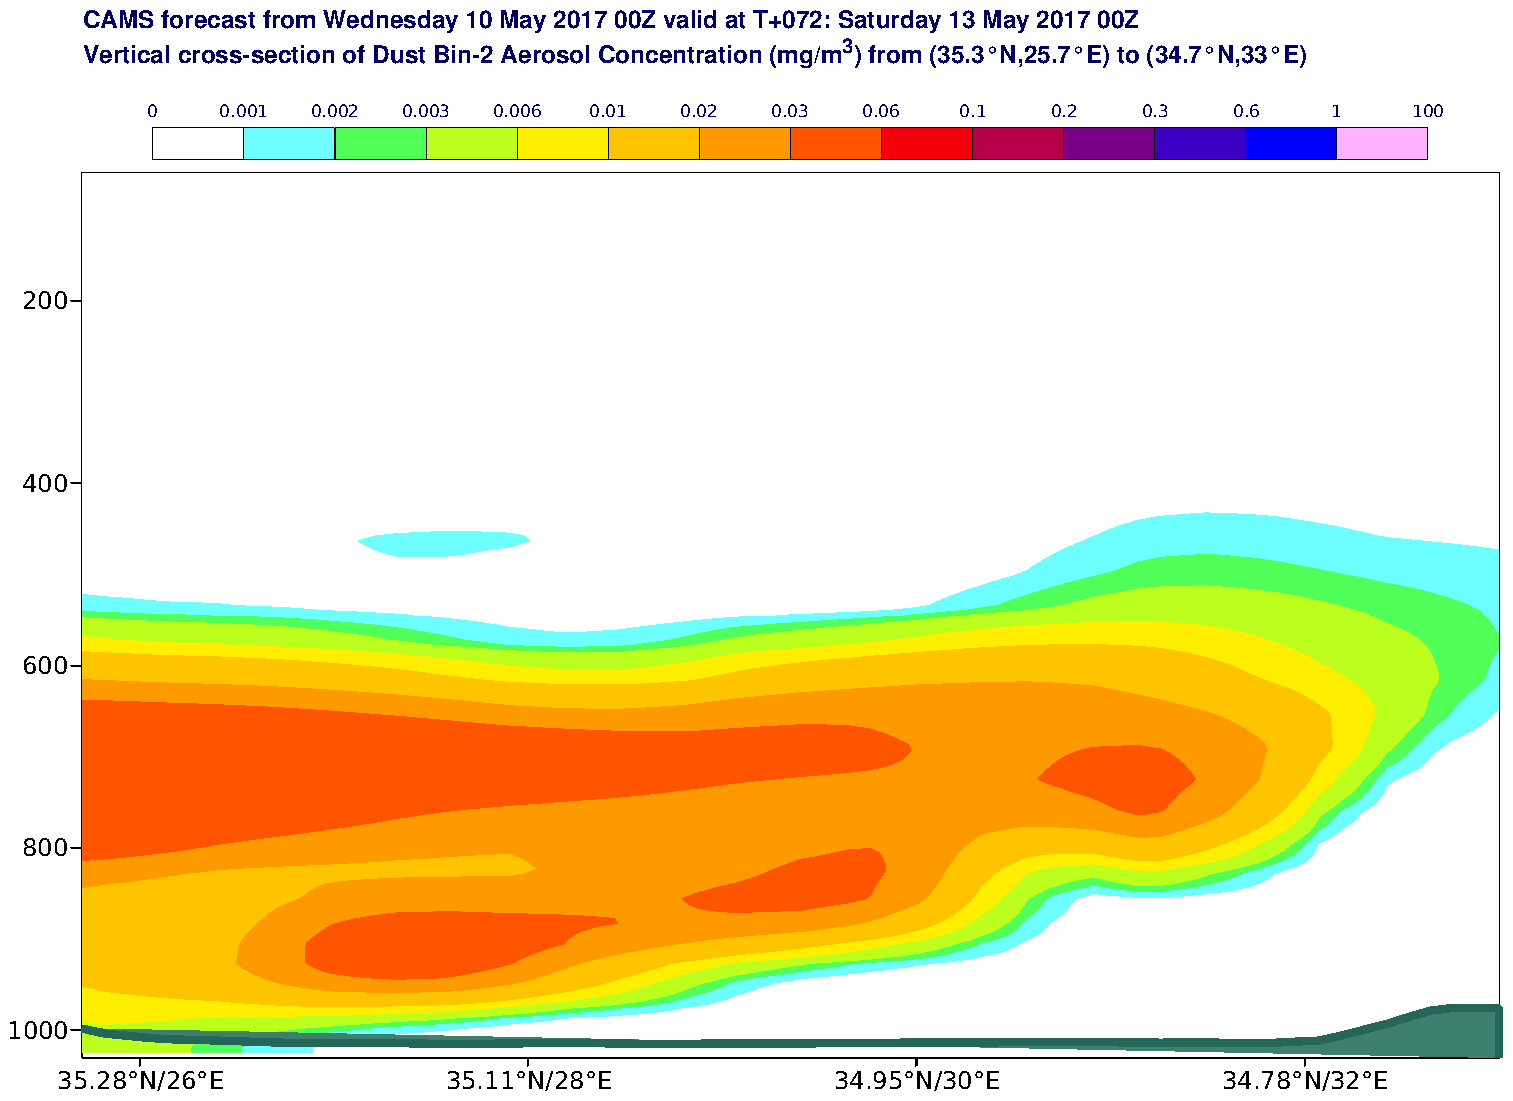 Vertical cross-section of Dust Bin-2 Aerosol Concentration (mg/m3) valid at T72 - 2017-05-13 00:00